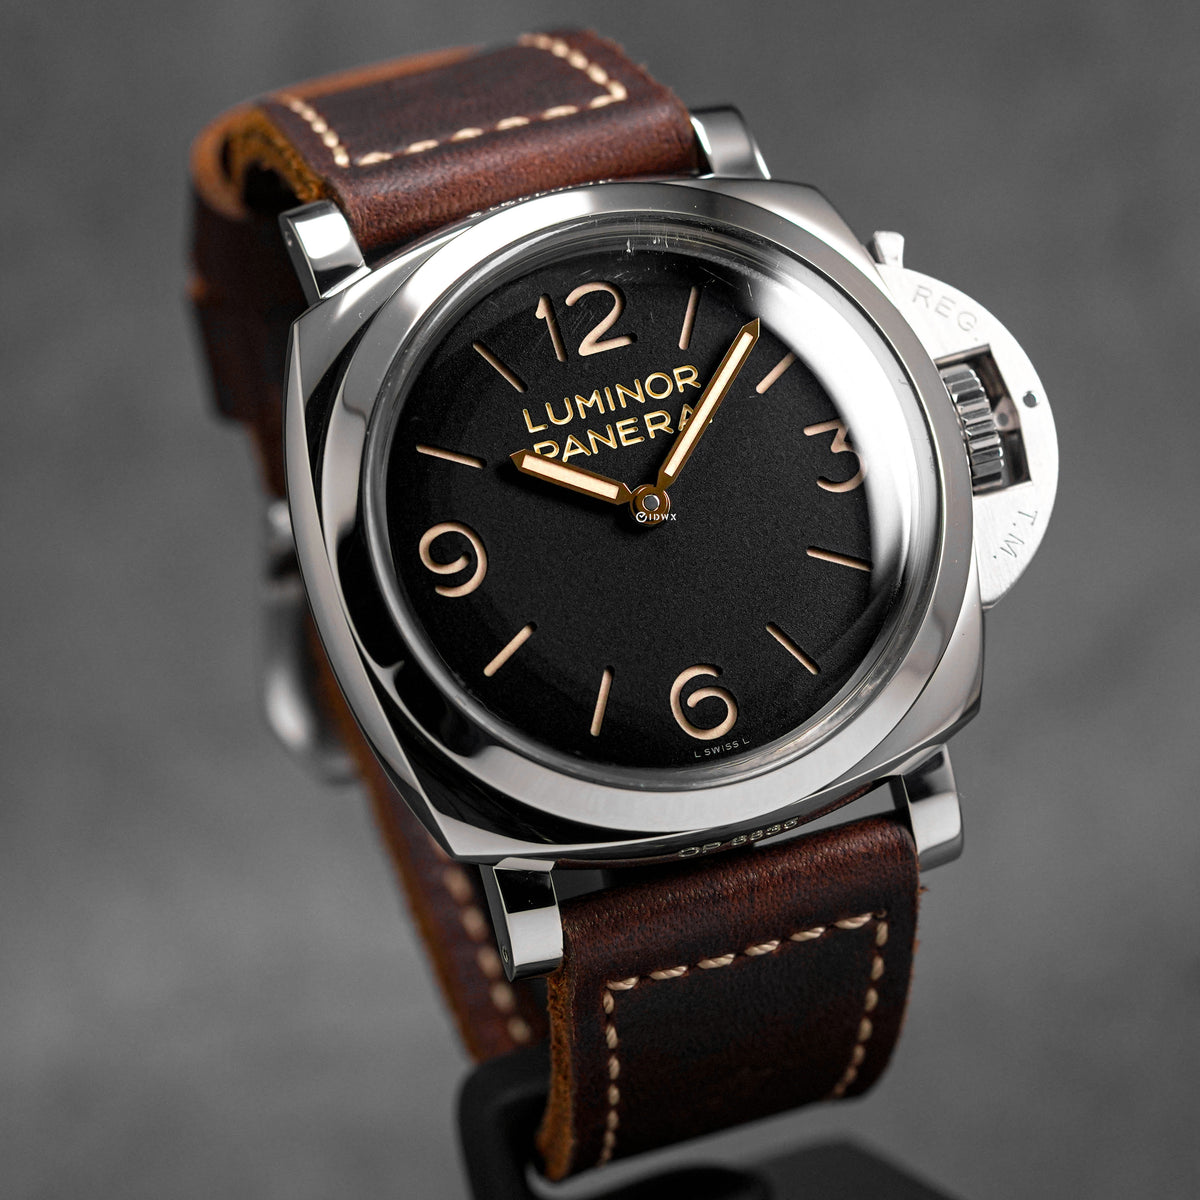 LUMINOR 1950 3 DAYS 47MM BLACK DIAL BROWN LEATHER STRAP PAM 372 (2014)